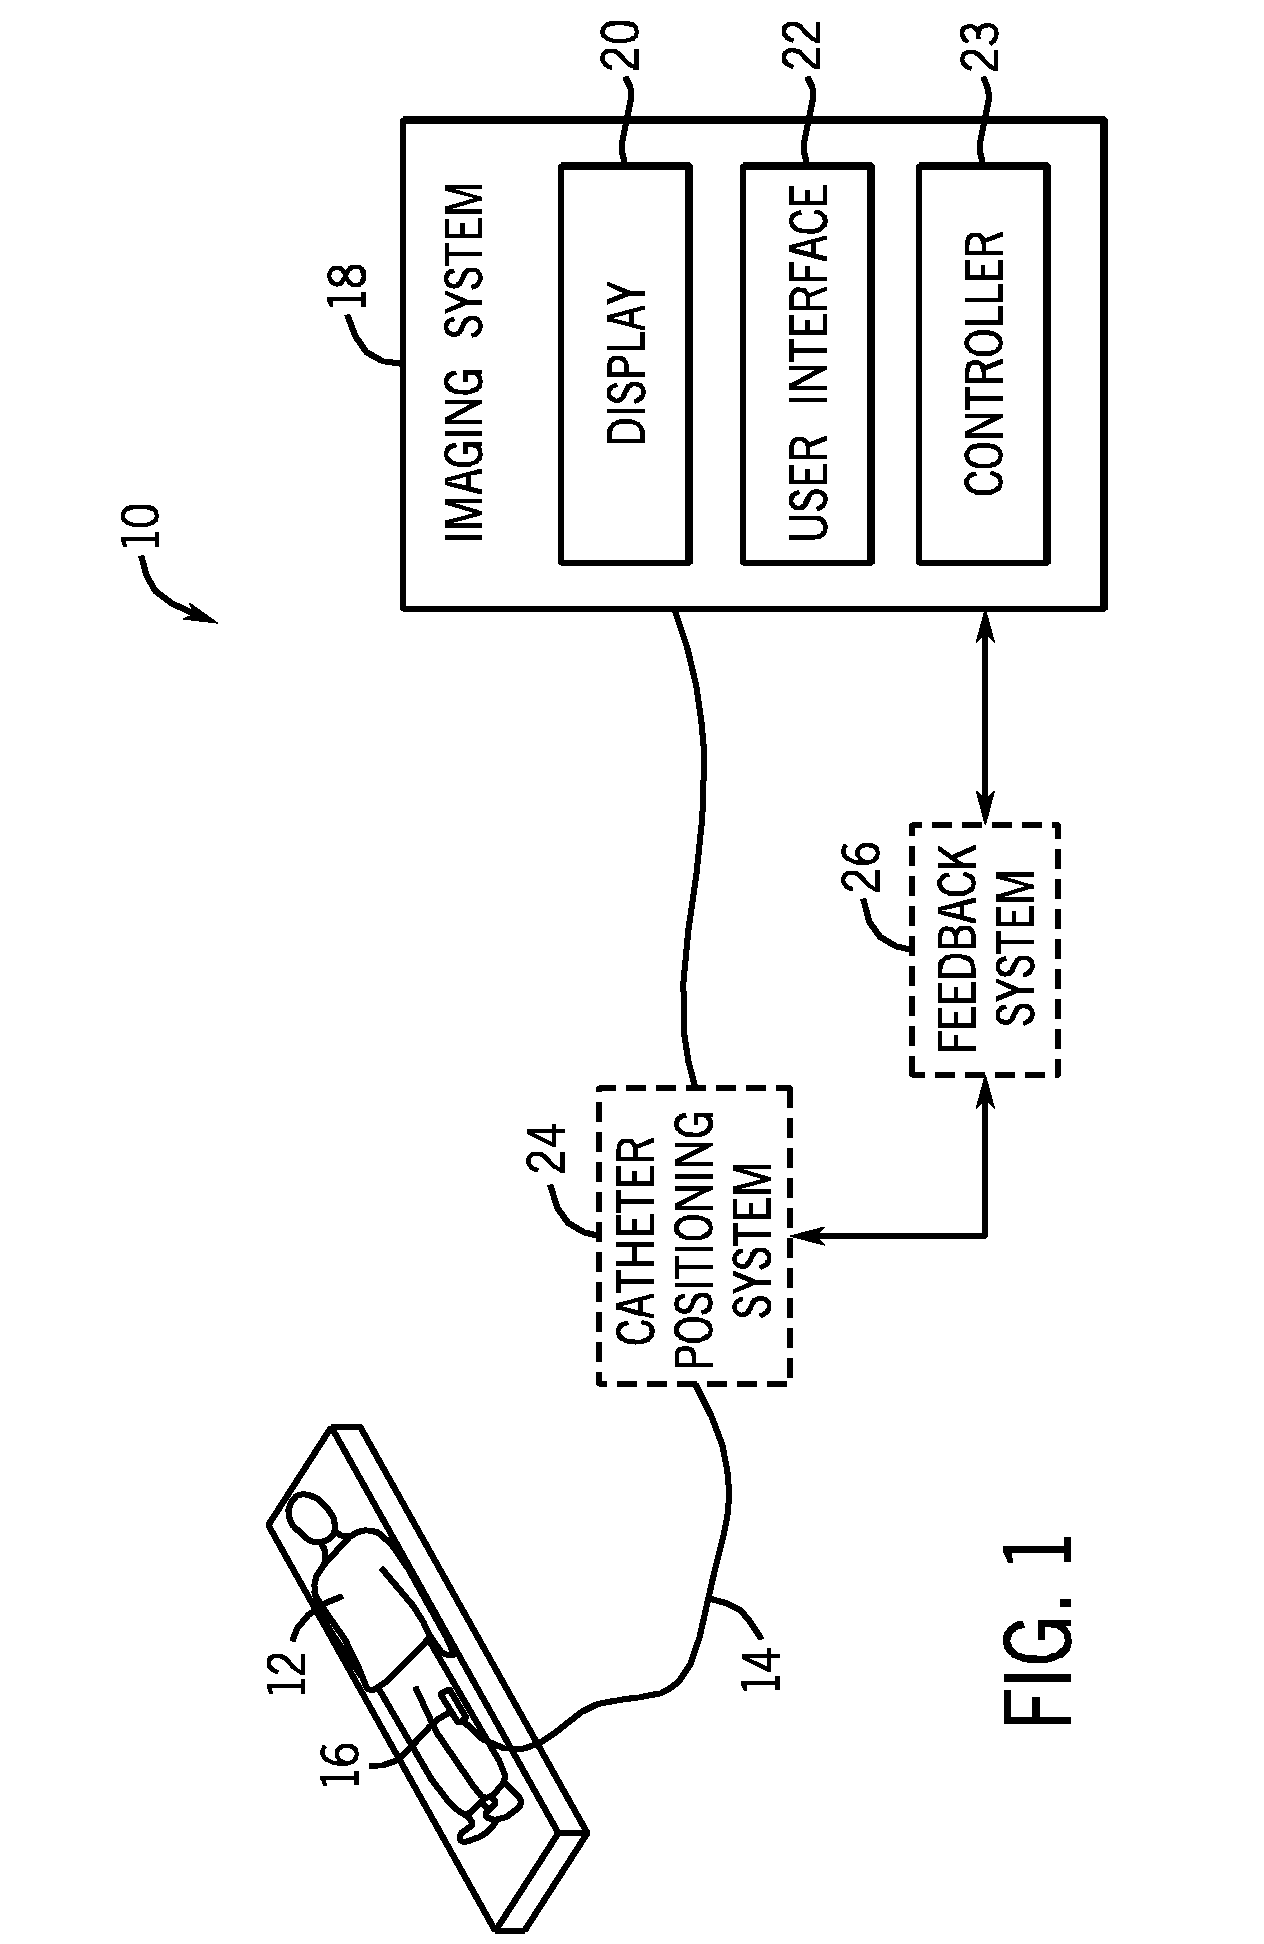 Integrated ultrasound imaging and ablation probe